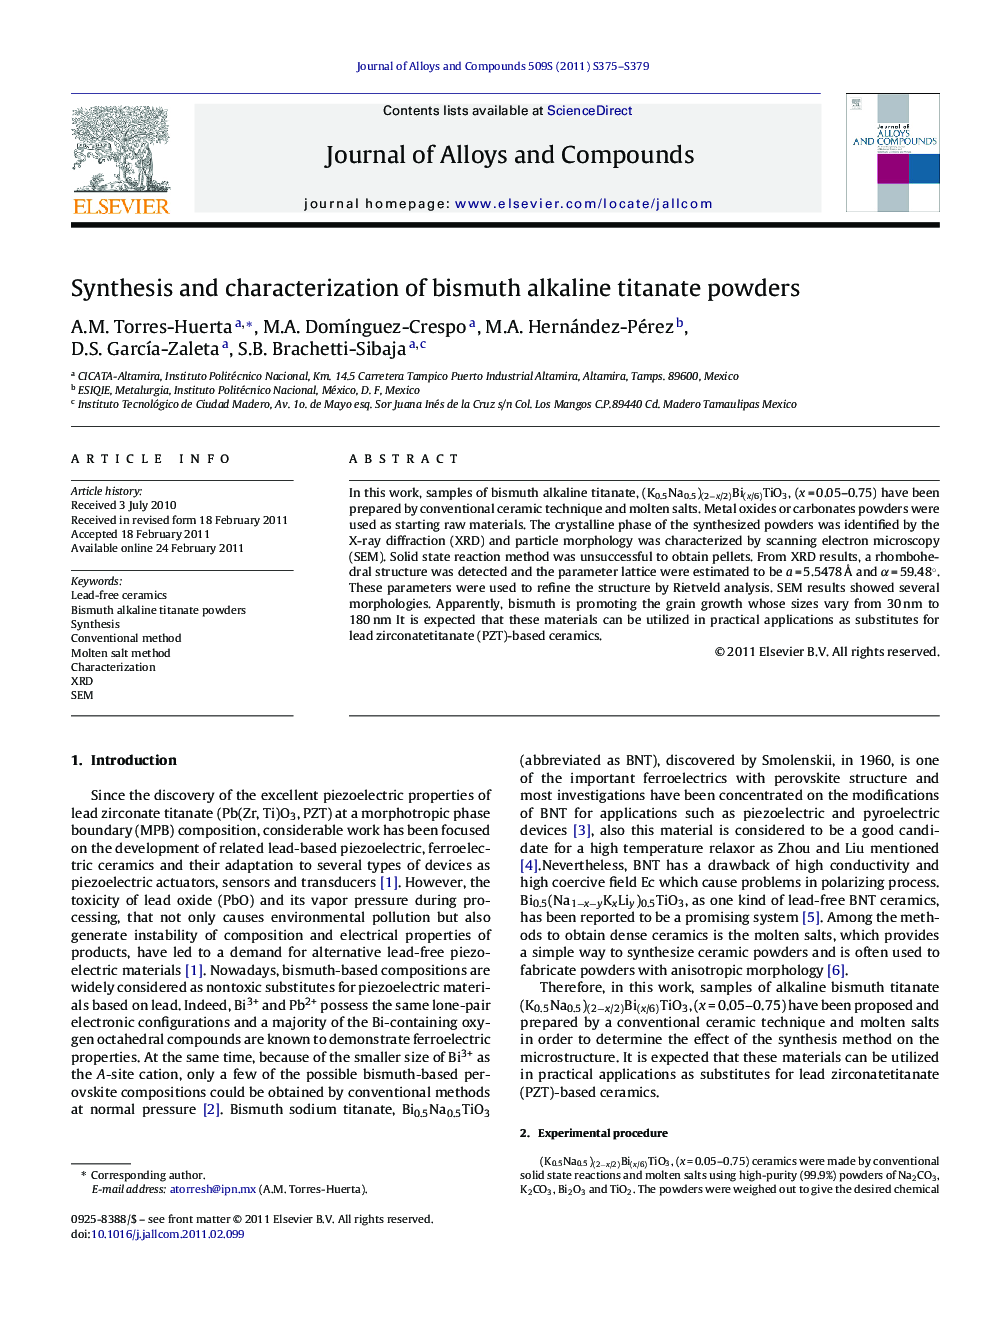 Synthesis and characterization of bismuth alkaline titanate powders